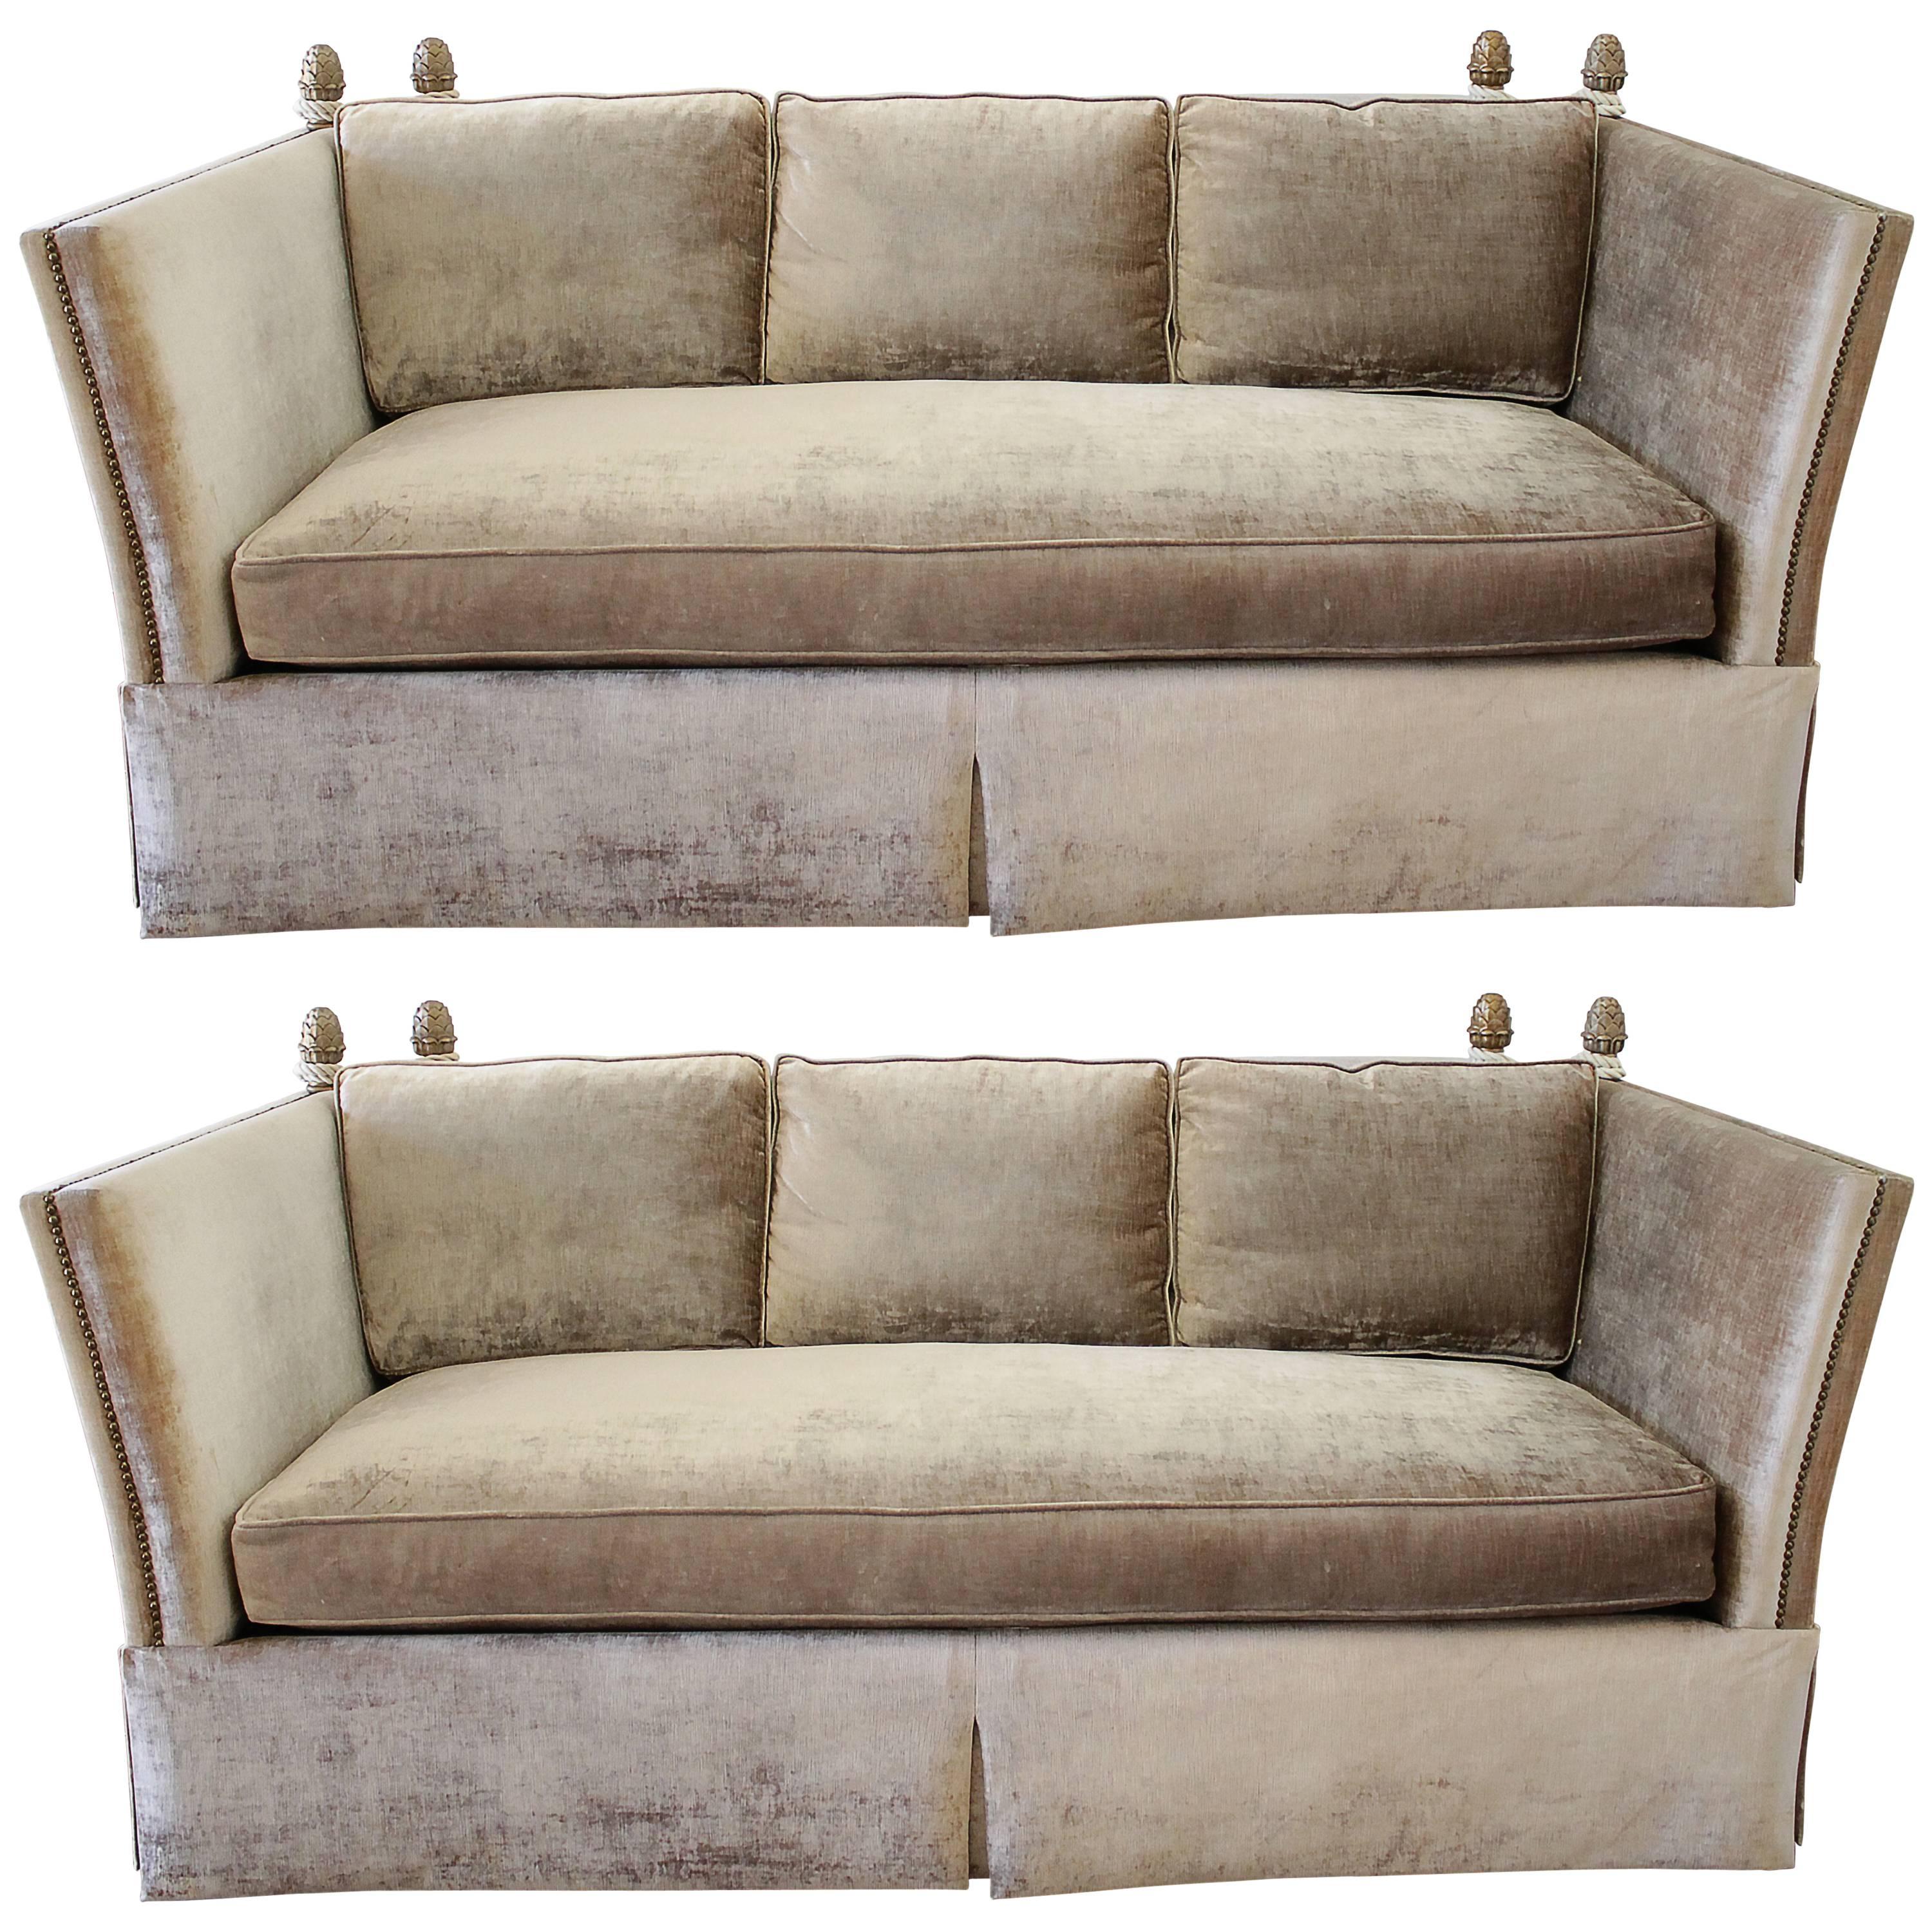 Pair of Knoll Style Sofas with Acorn Finials in Champagne Velvet Upholstery